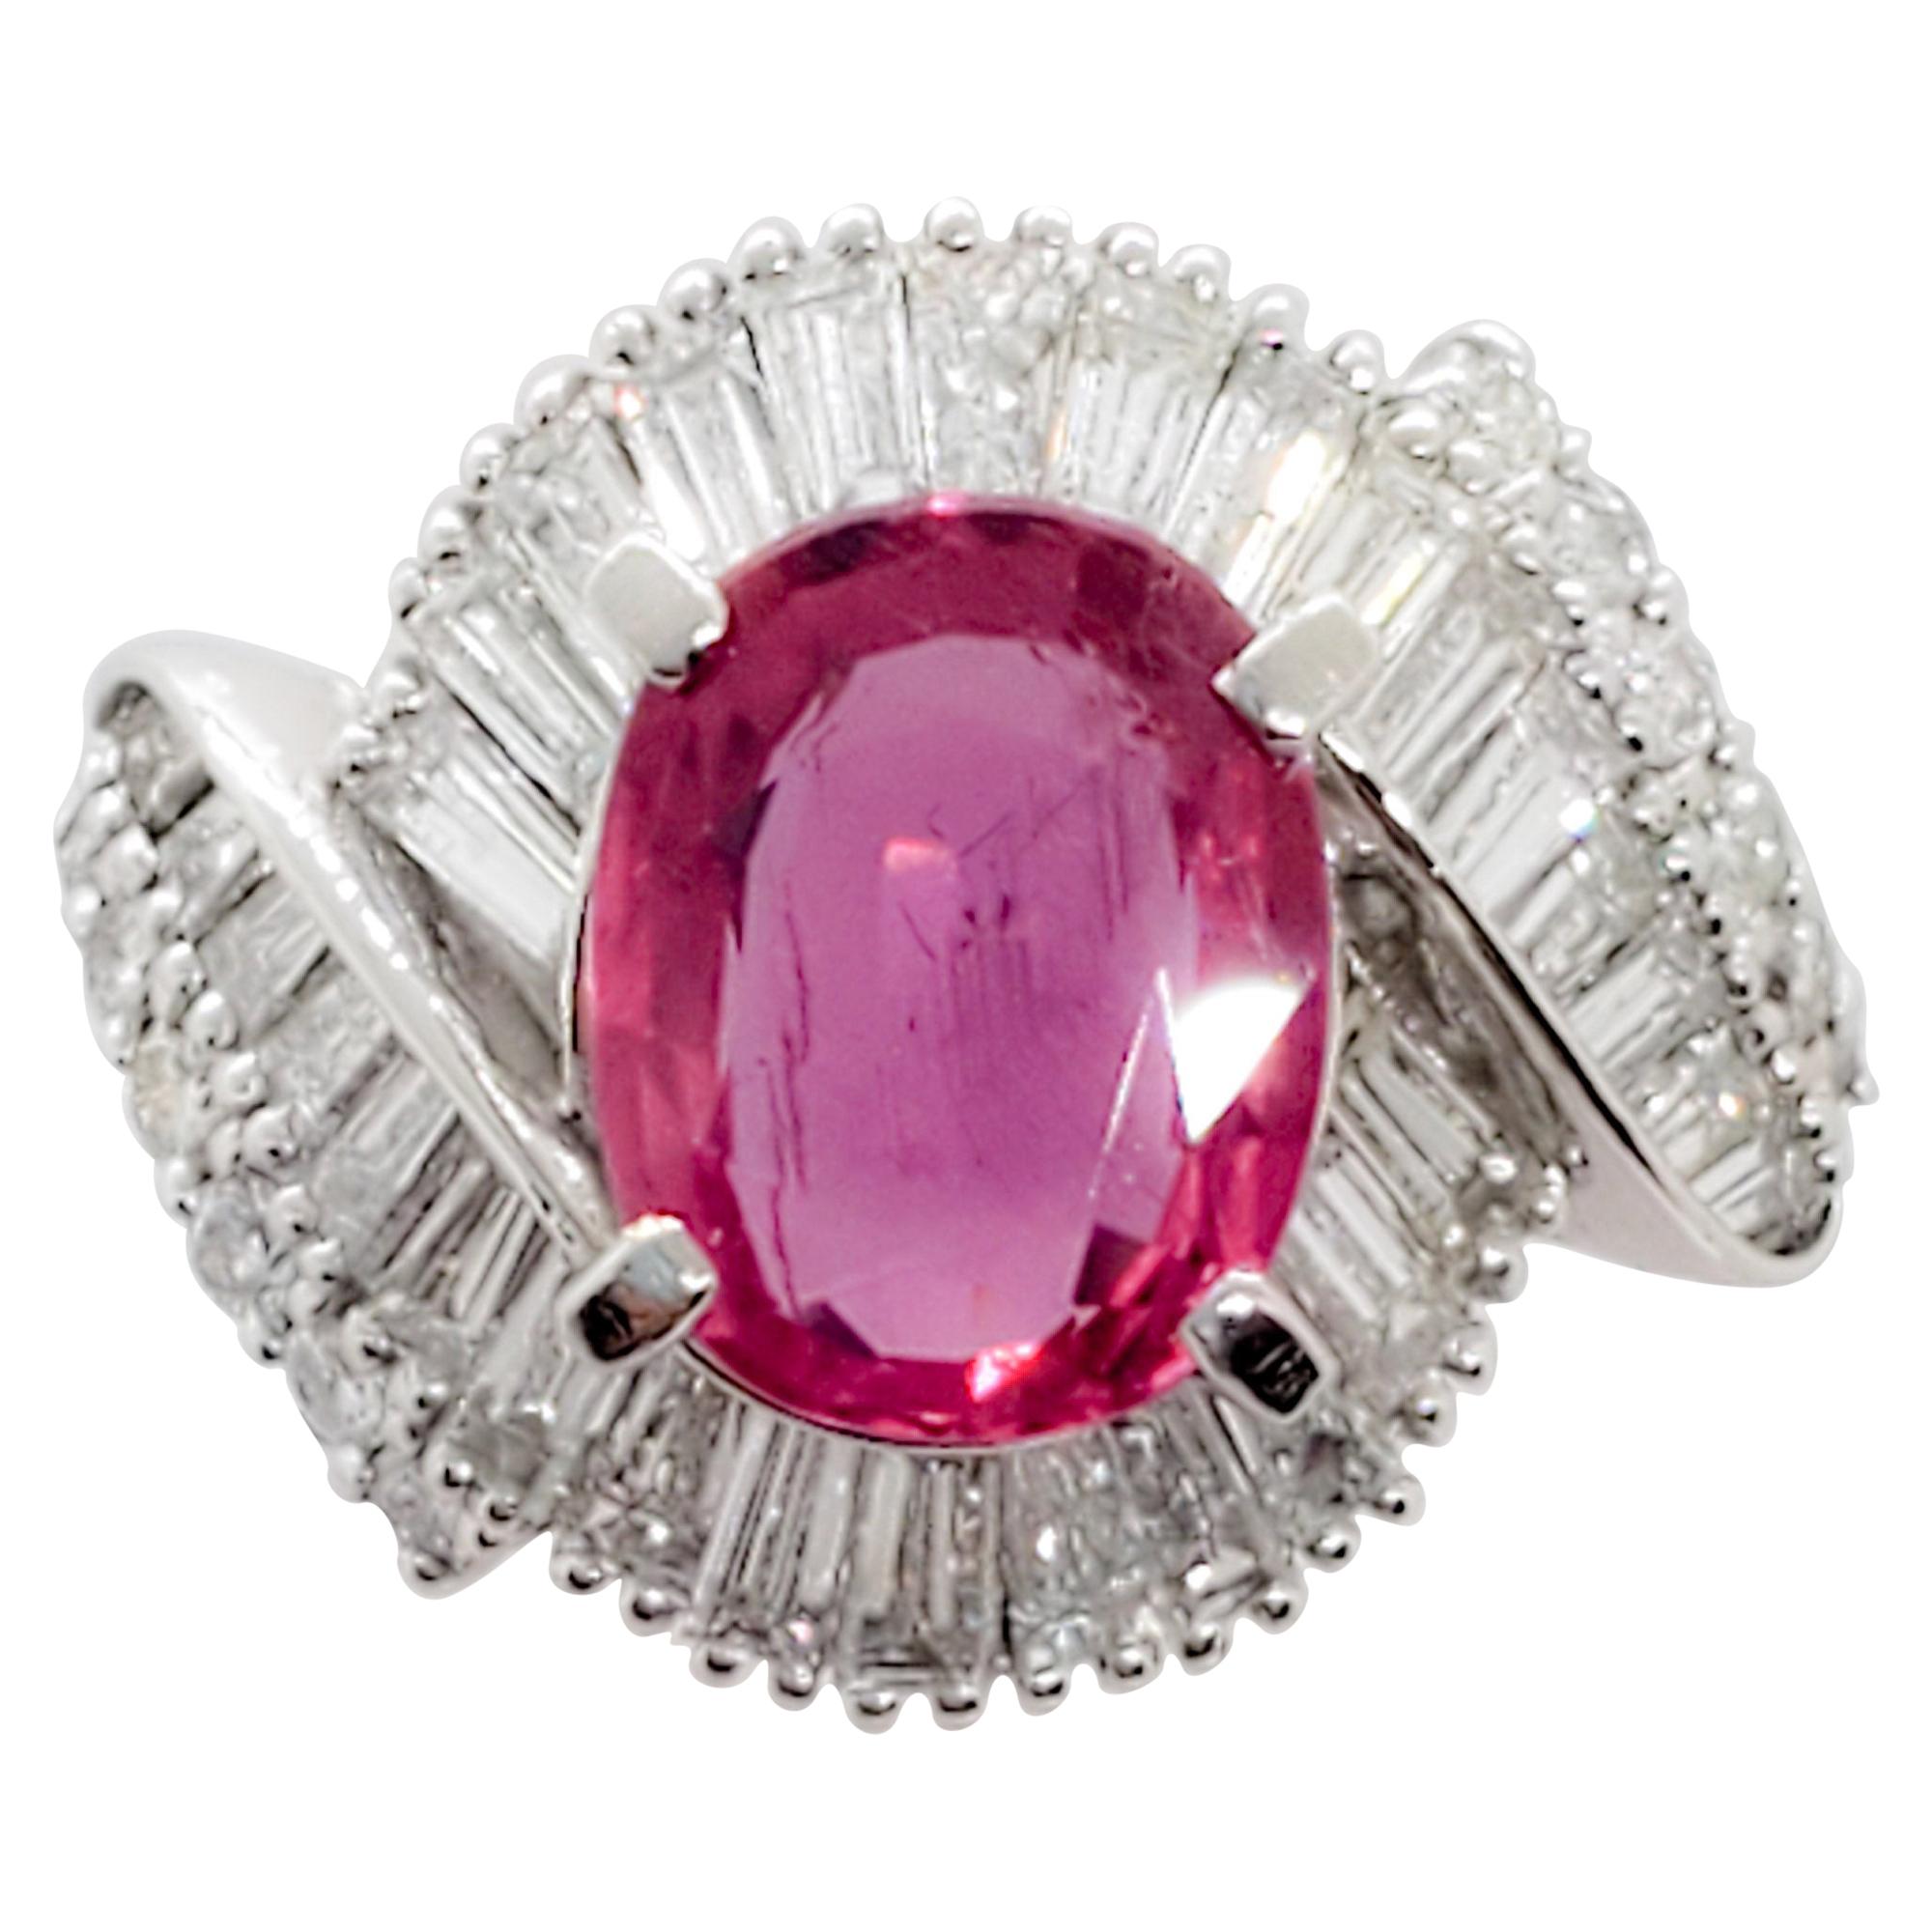 Mozambique Purplish Pink Sapphire Oval and White Diamond Cocktail Ring